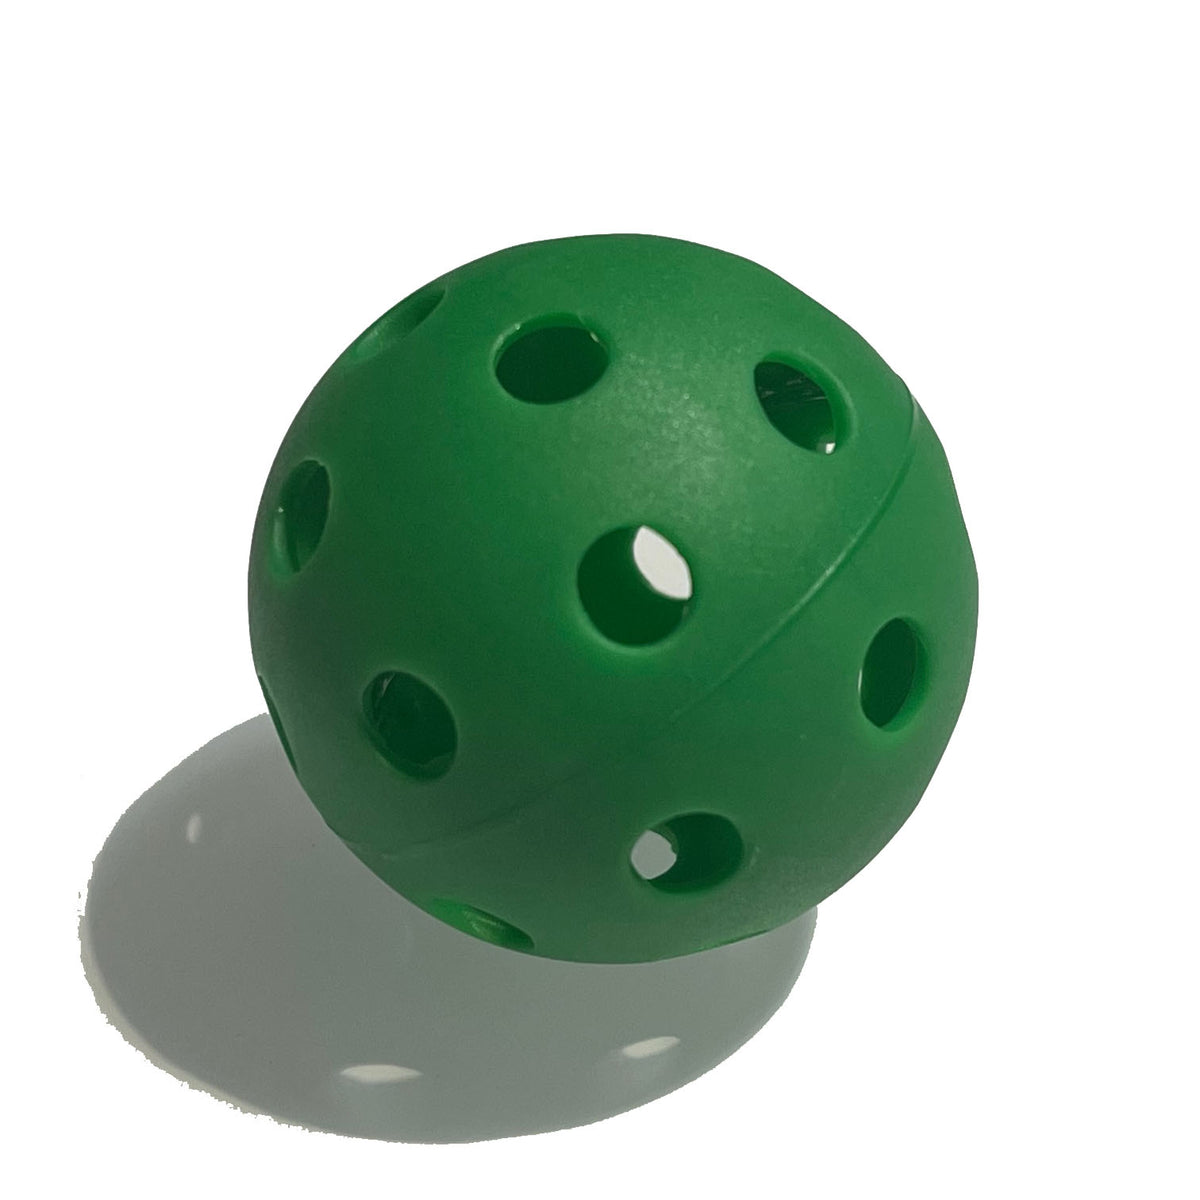 41% off - 24 Golf Size Training Balls - SPECIAL DEAL